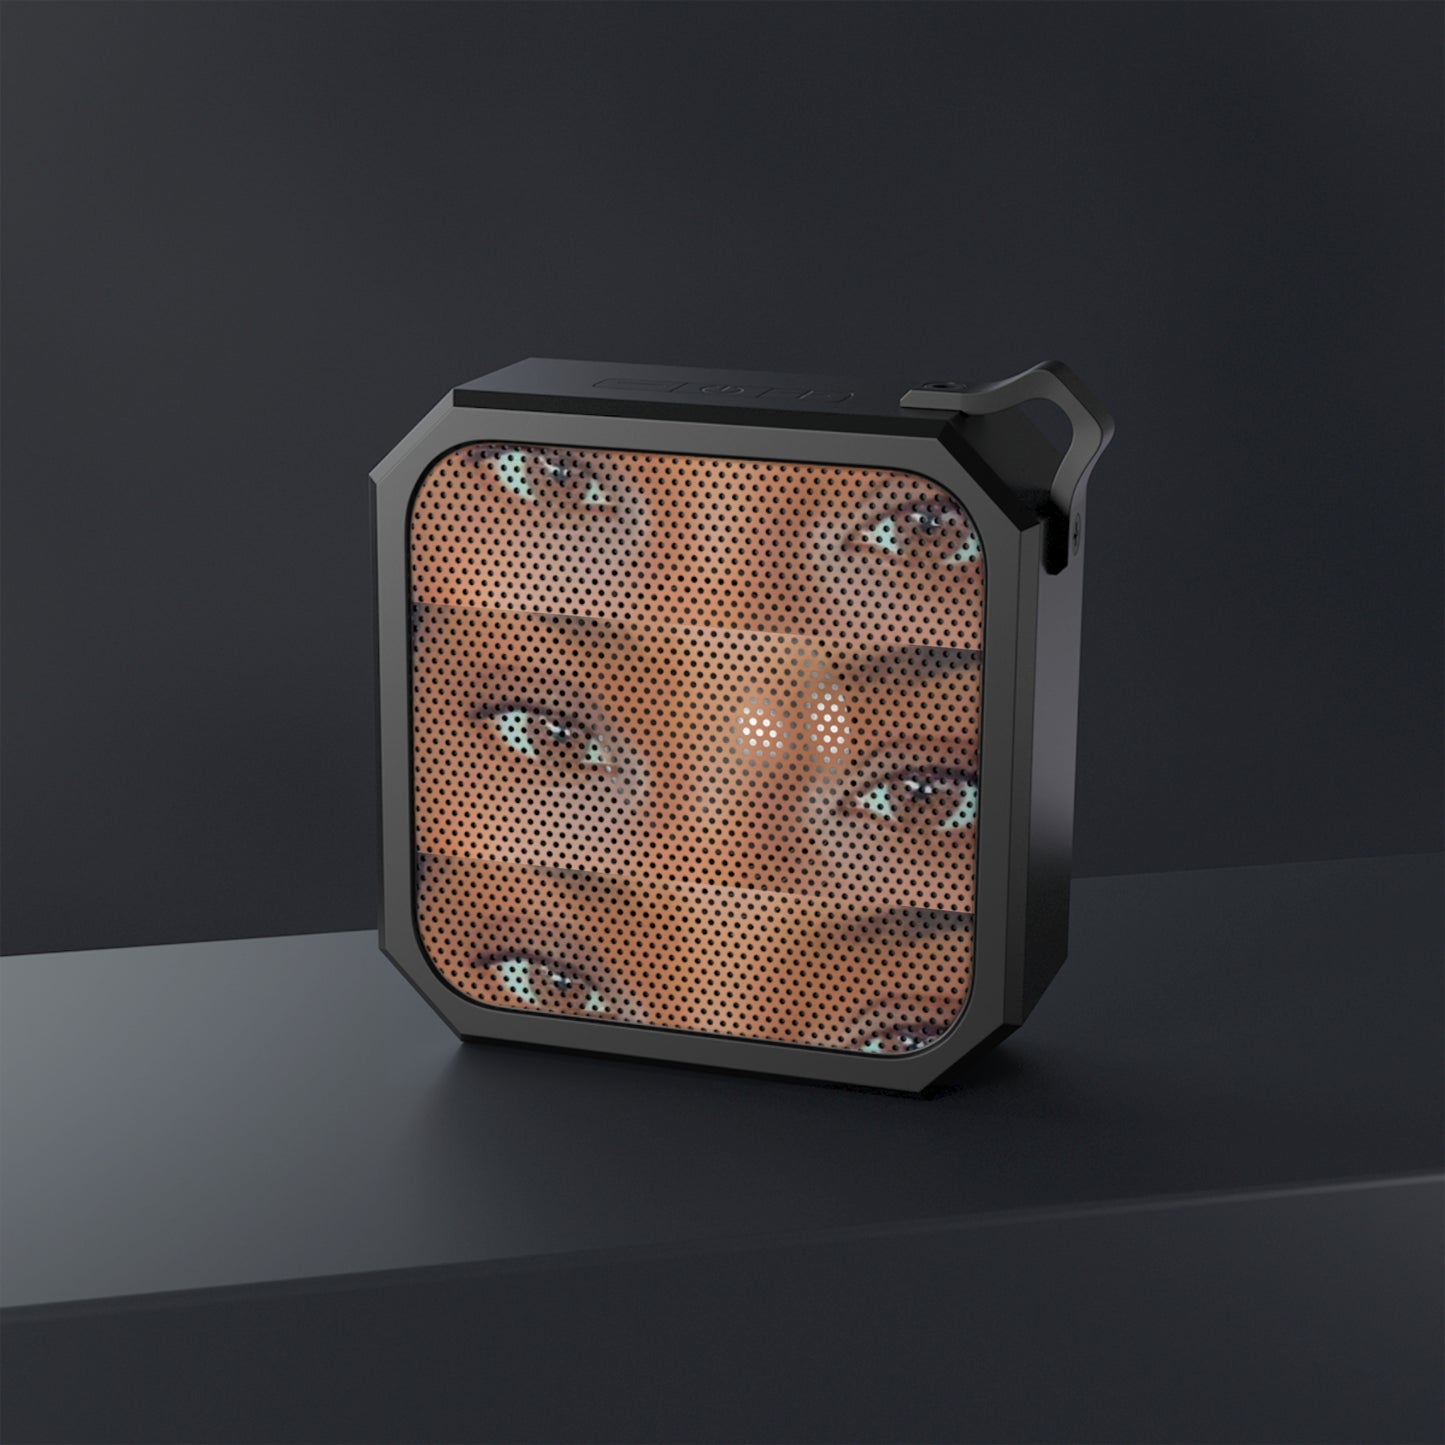 Captivate & Play: Custom Selfie Bluetooth Speaker for Women with Mesmerizing Eyes - Order Now!